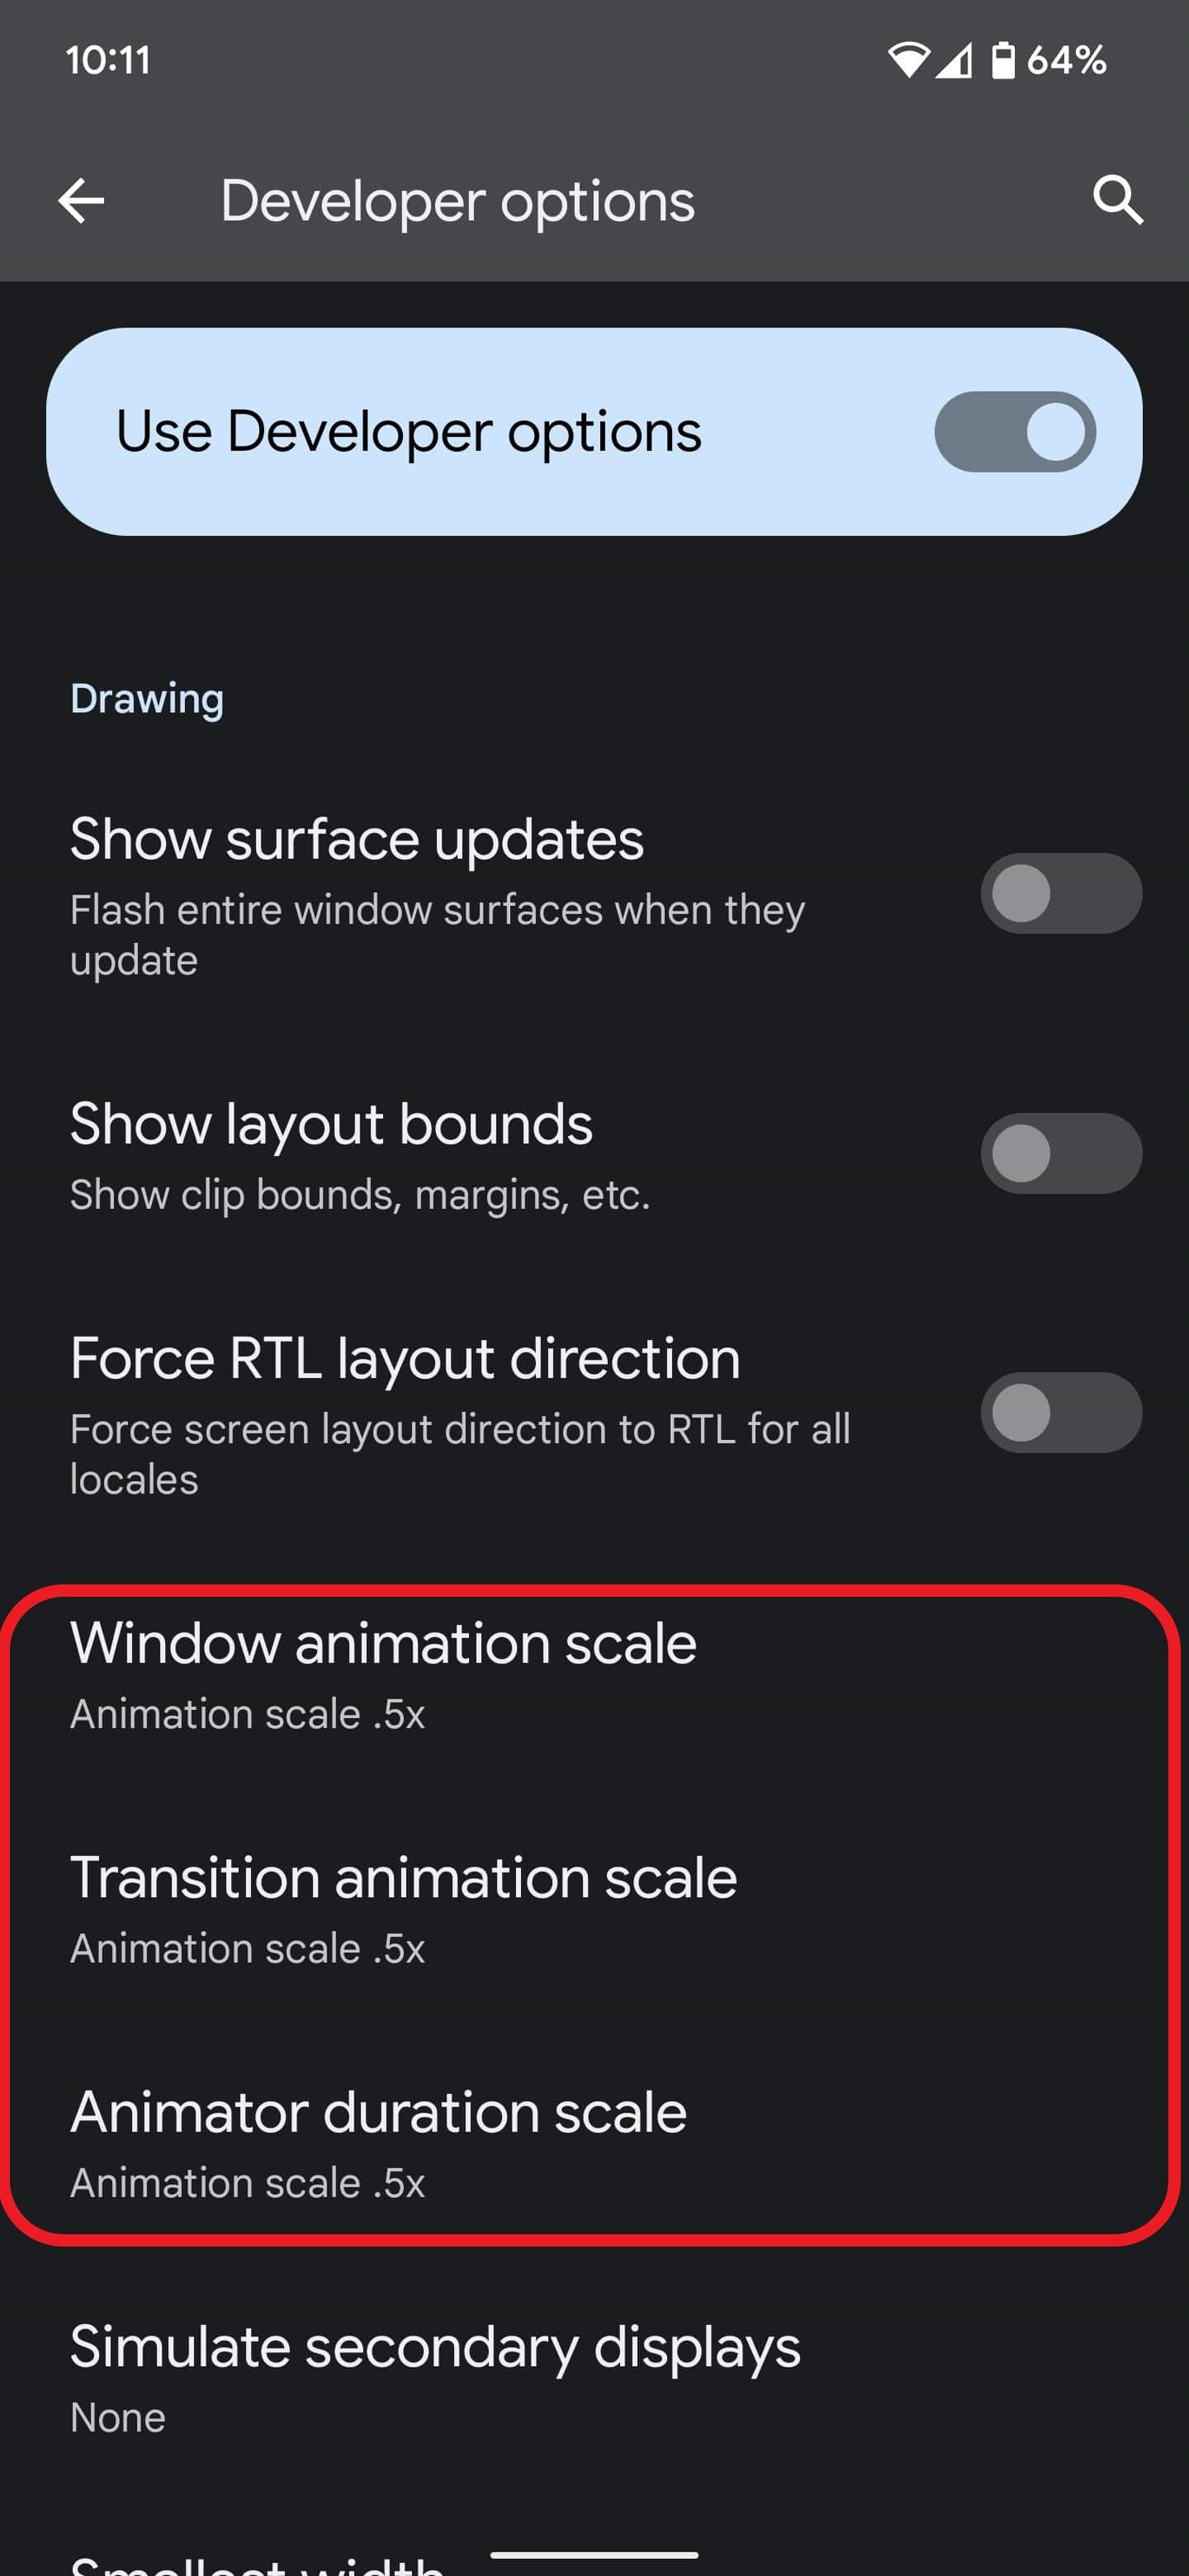 speed up animations on Android devices